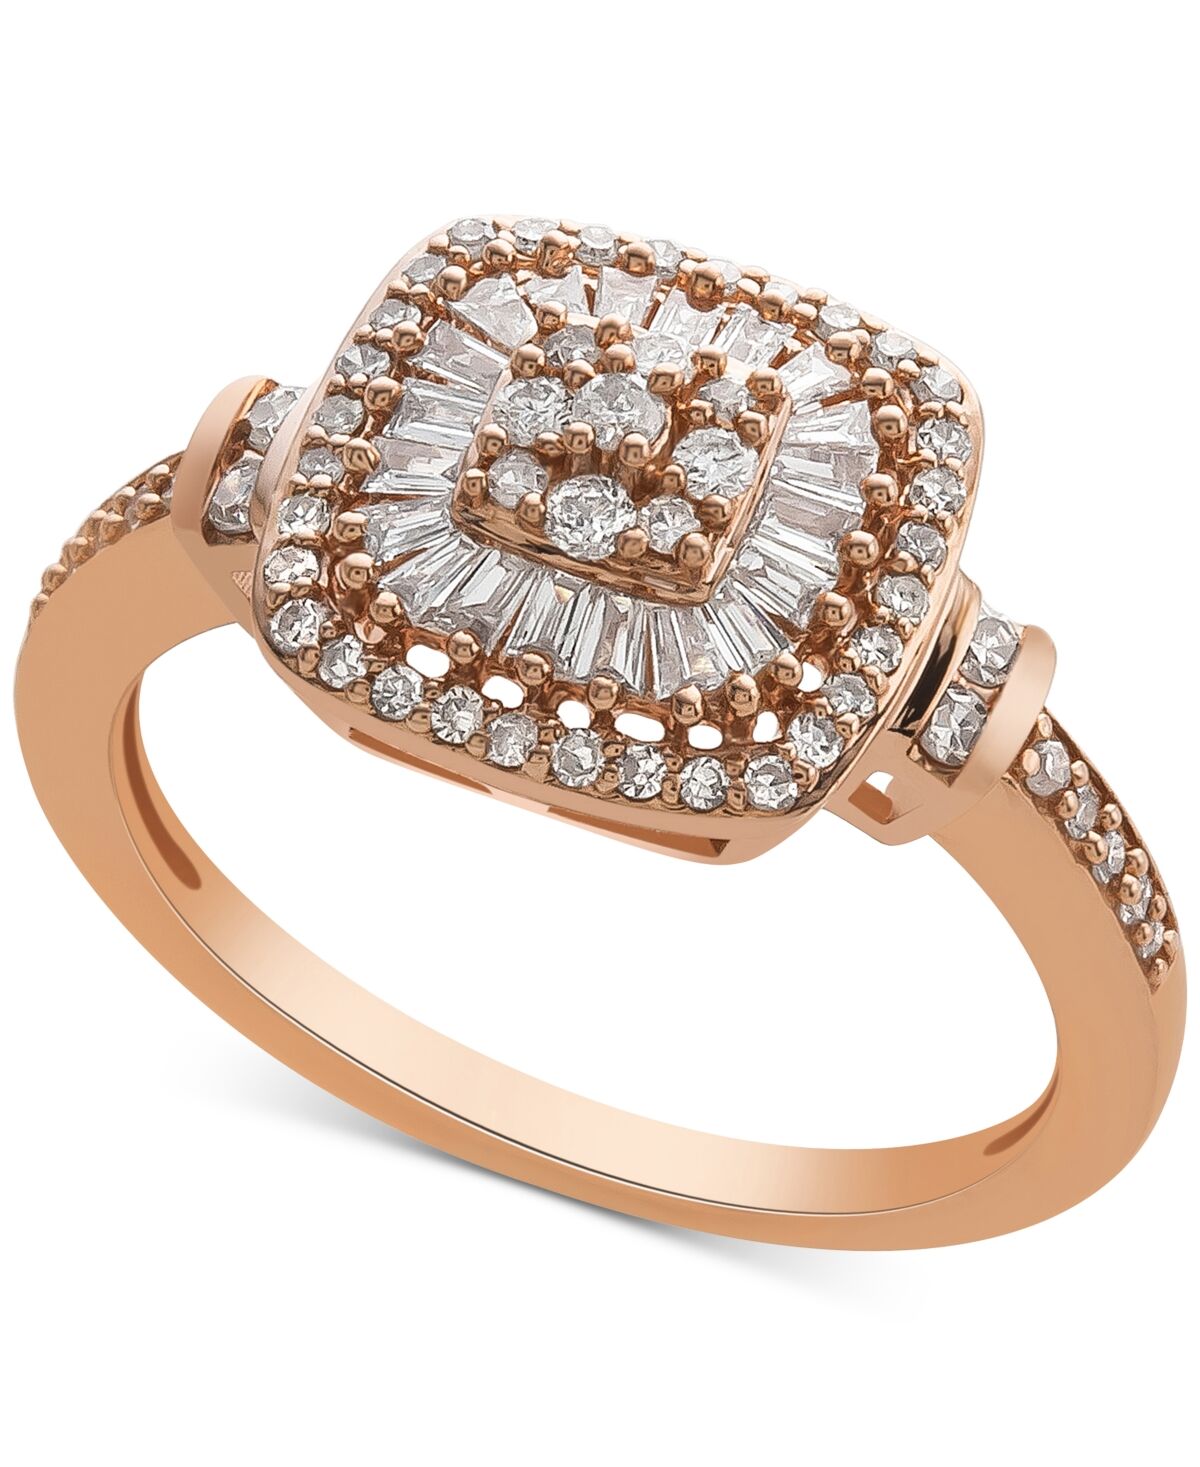 Macy's Diamond Vintage-Inspired Ring (1/2 ct. t.w.) in 14k White, Yellow or Rose Gold - Rose Gold